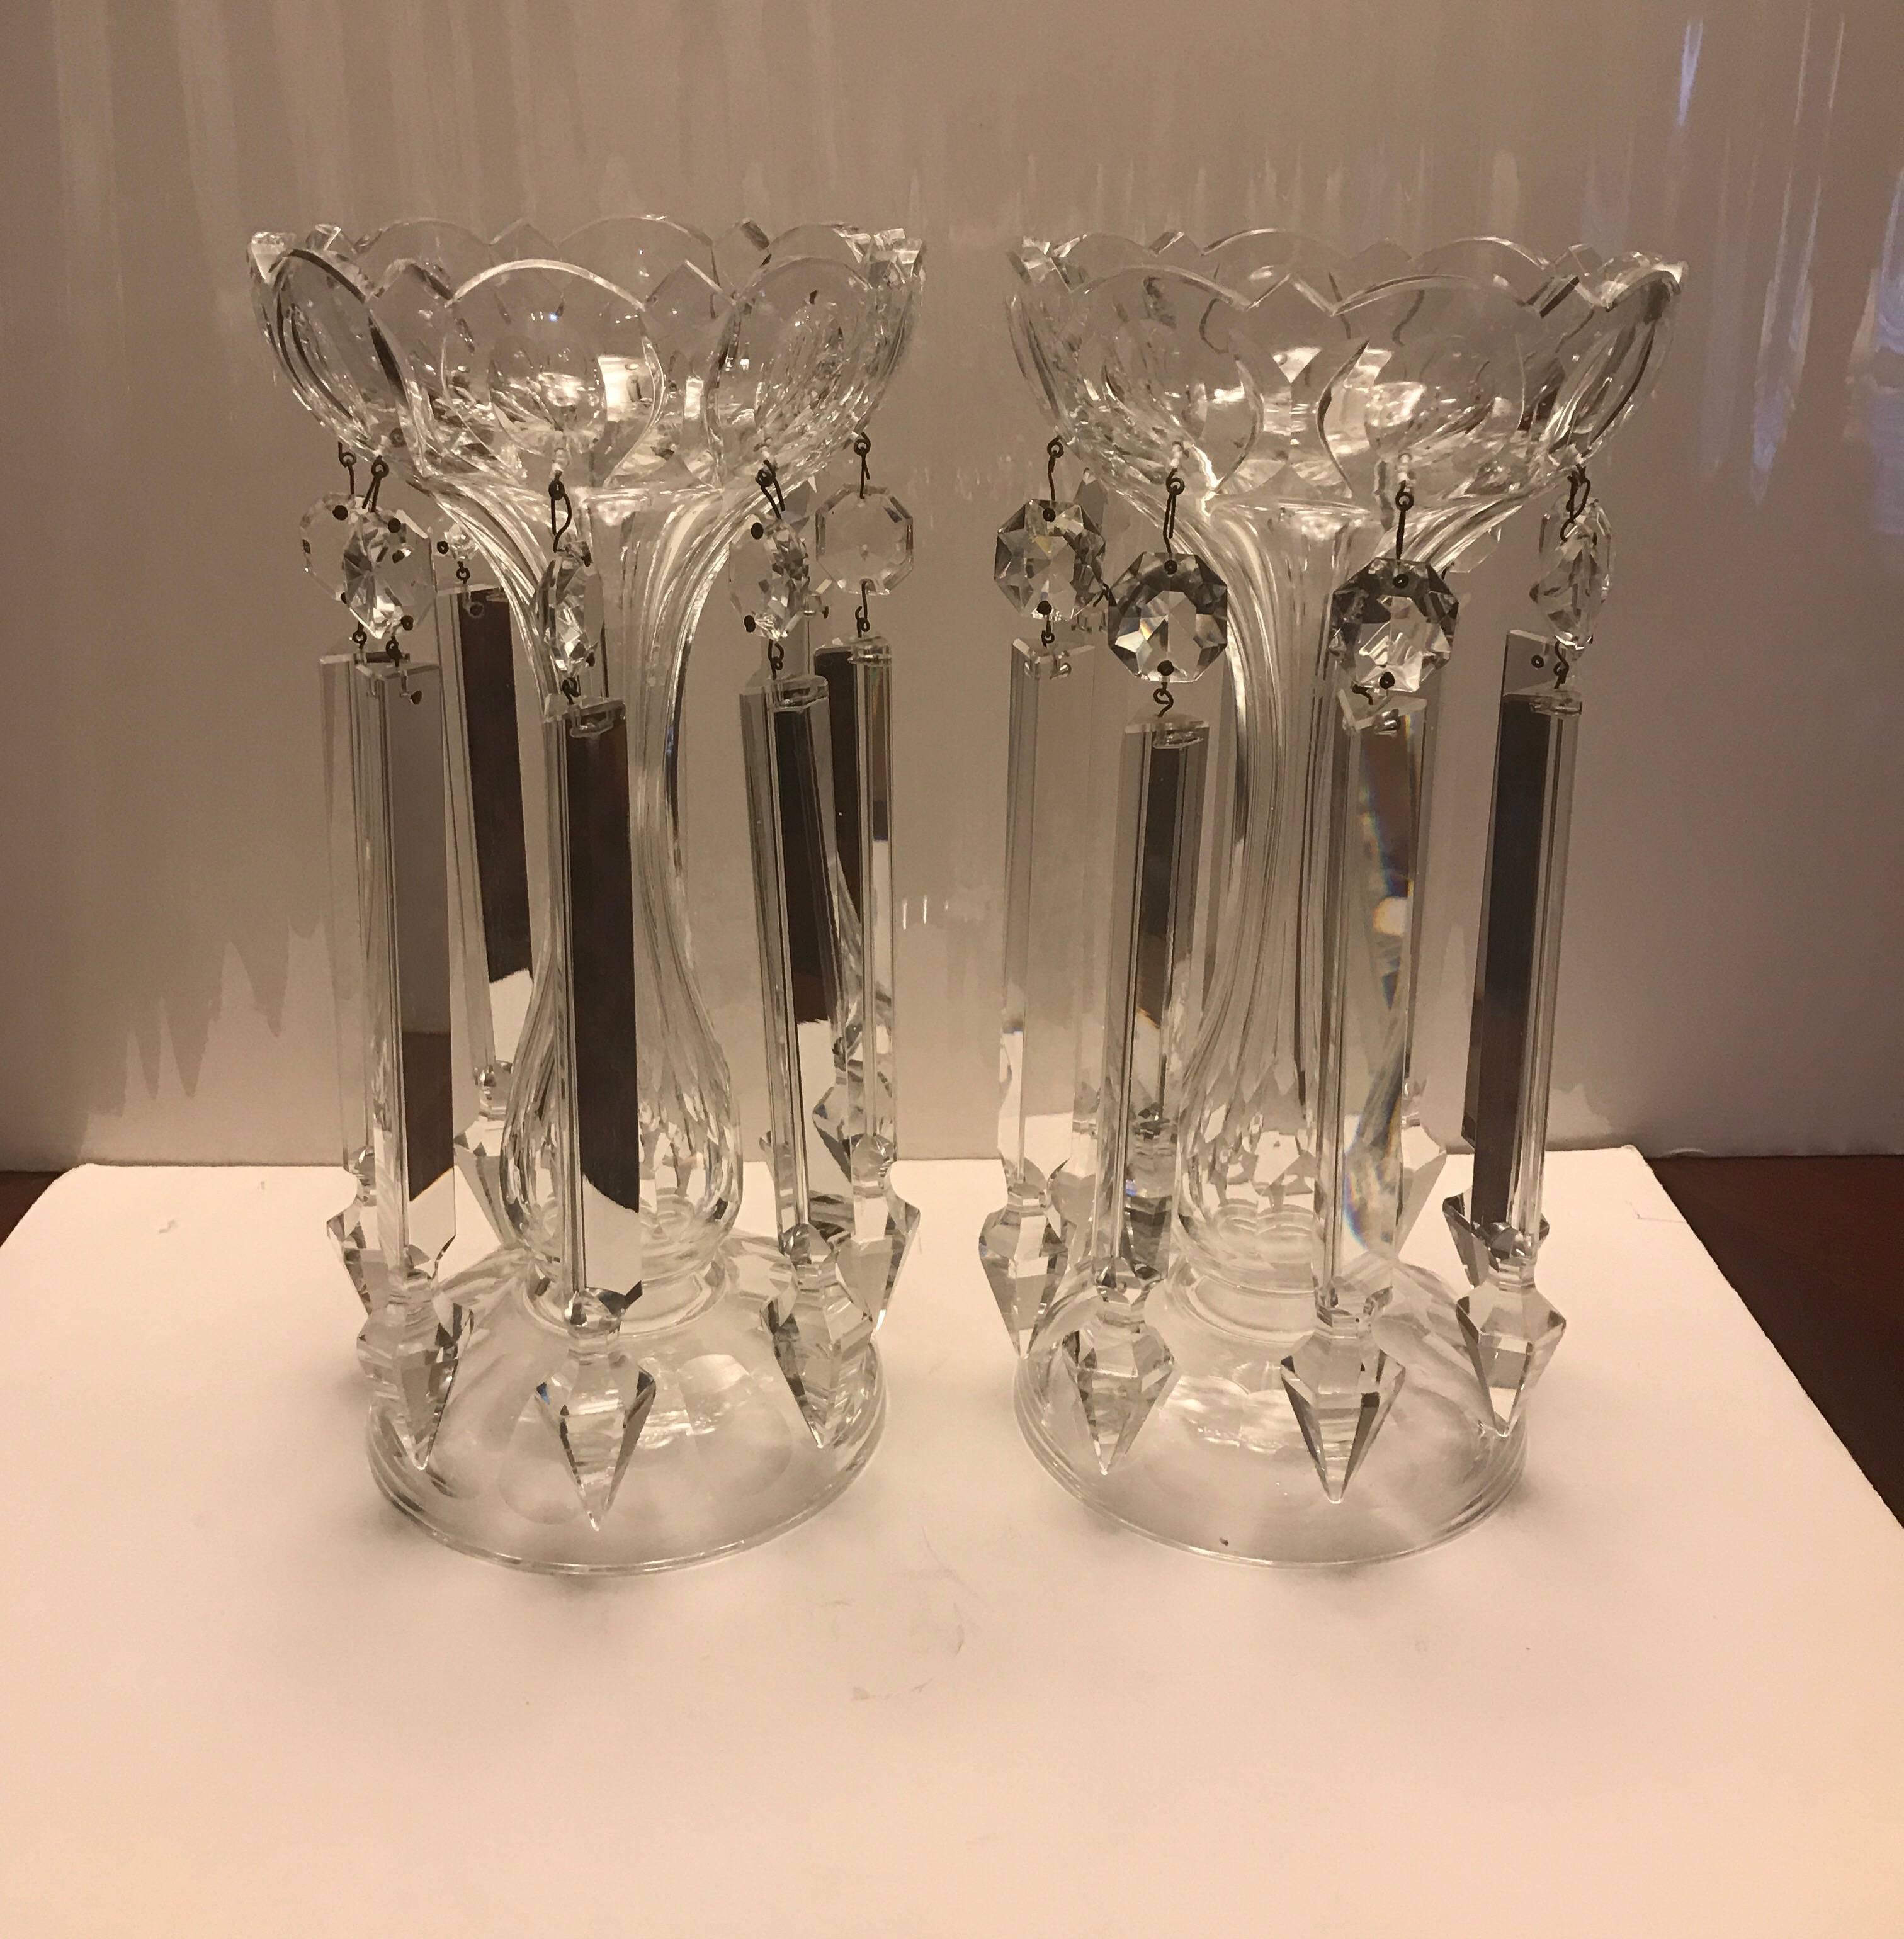 A pair of elegant cut-glass mantel lusters. The bowl tops with tapered panel cut centers with round bases. The candle holders have shimmering mirror like long cut speared prisms all around.  Hand blown, hand cut on a wheel 